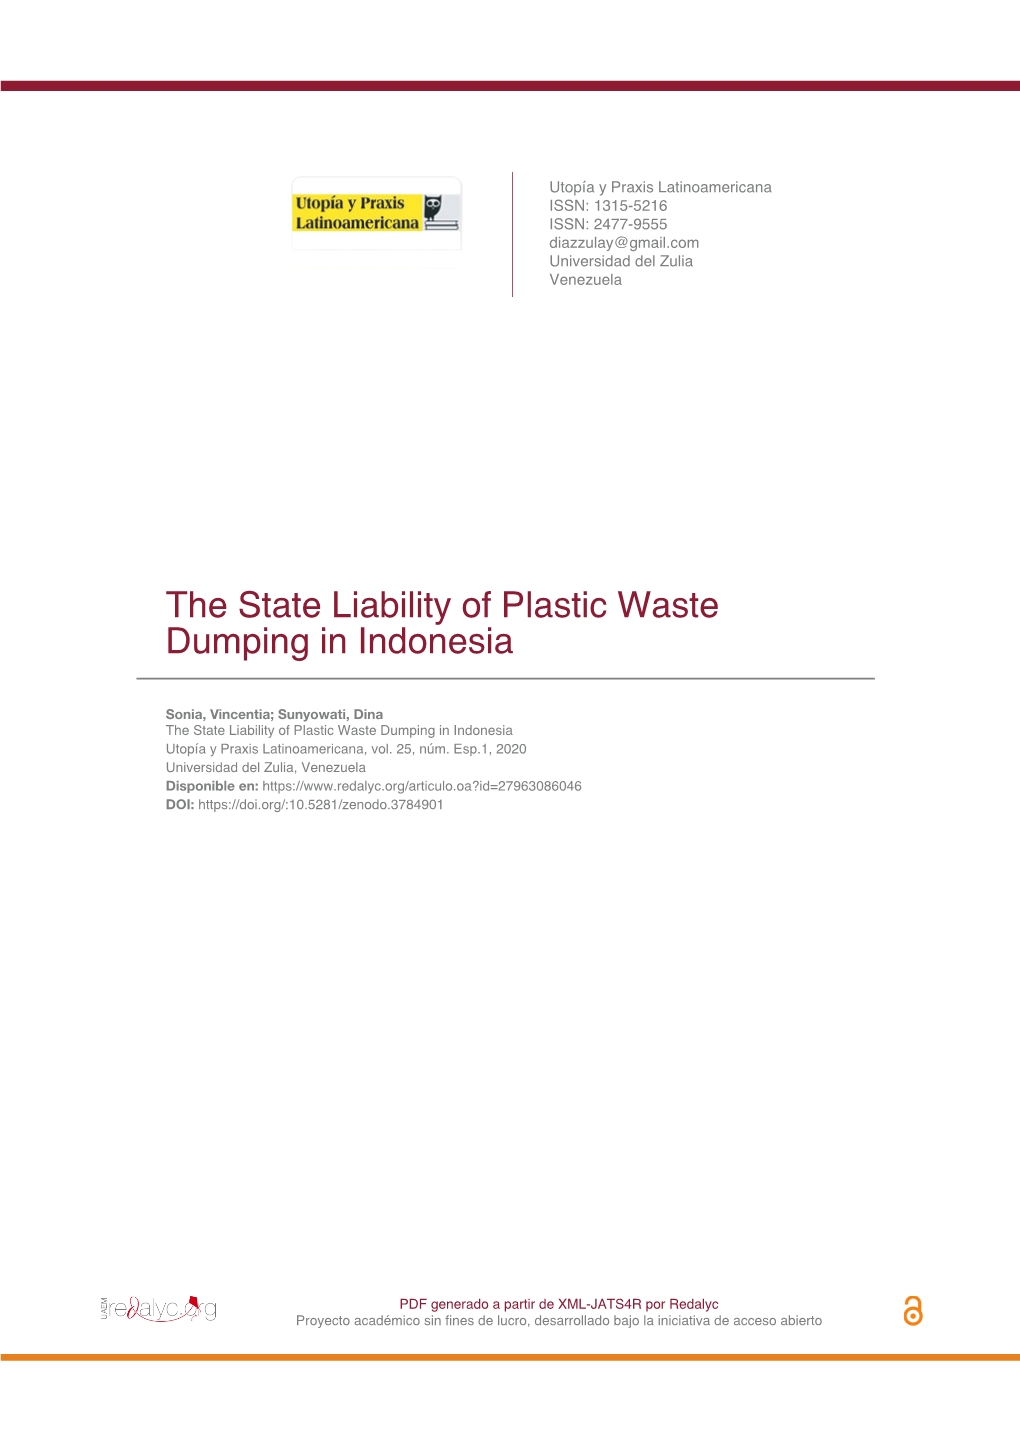 The State Liability of Plastic Waste Dumping in Indonesia